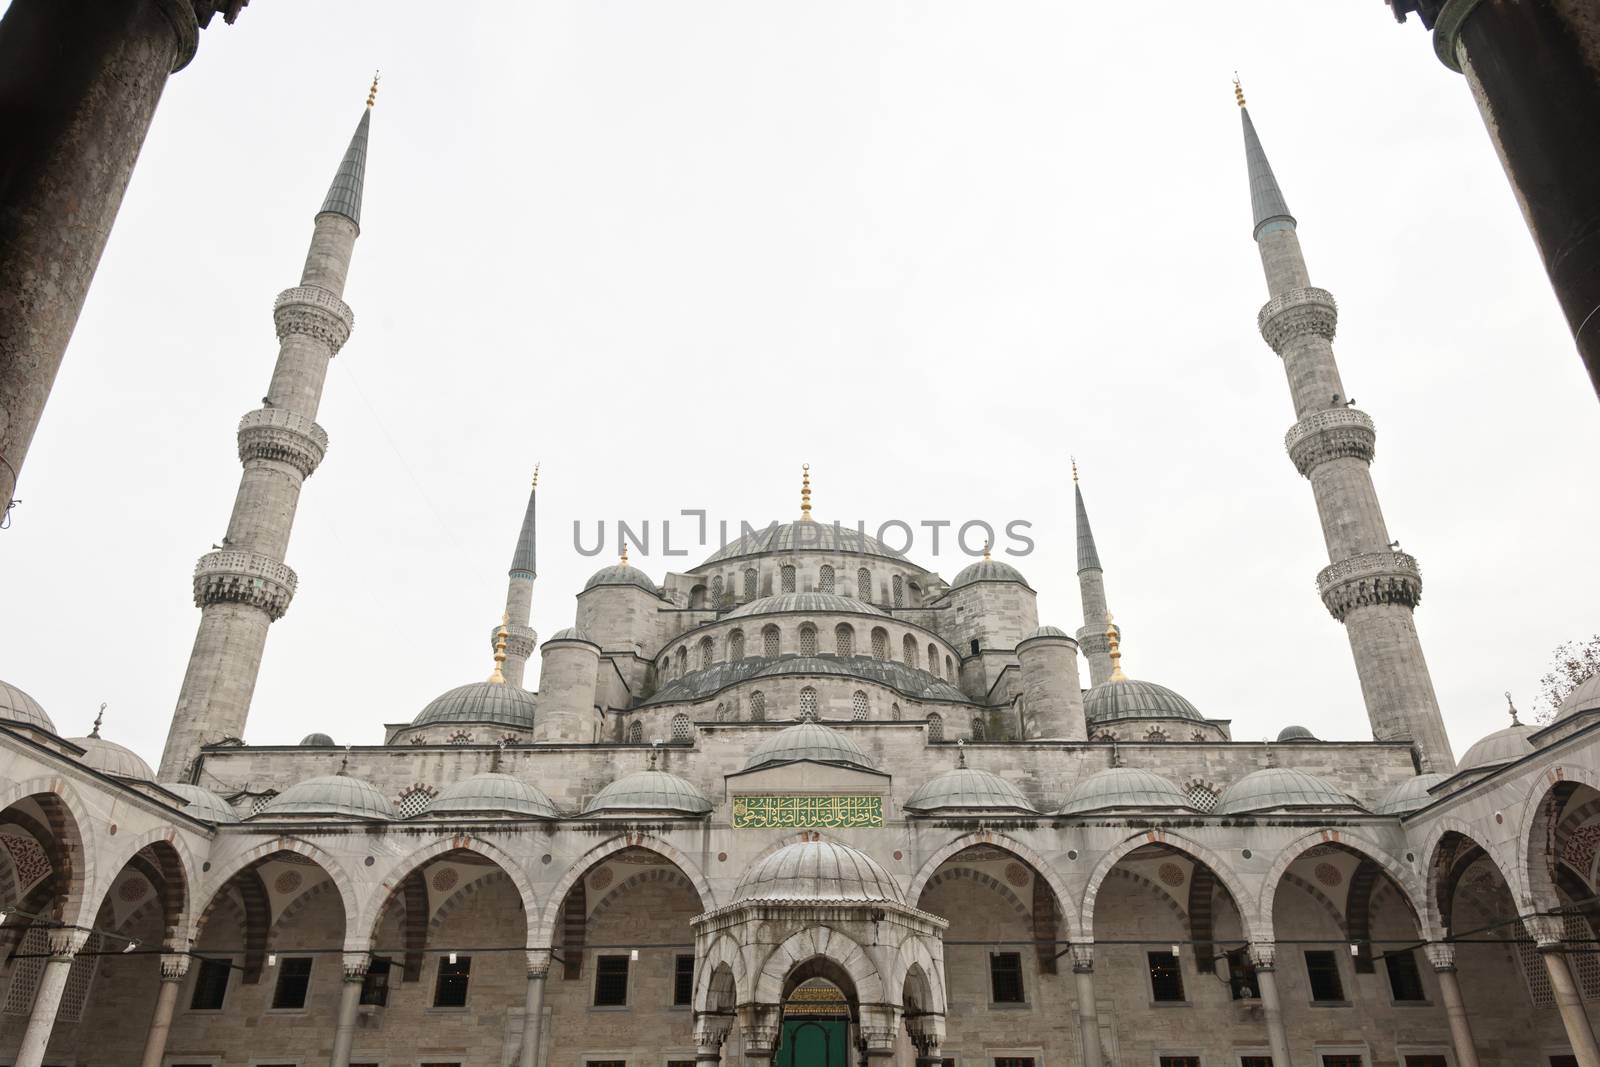 The Blue Mosque in Istanbul, Turkey by emirkoo